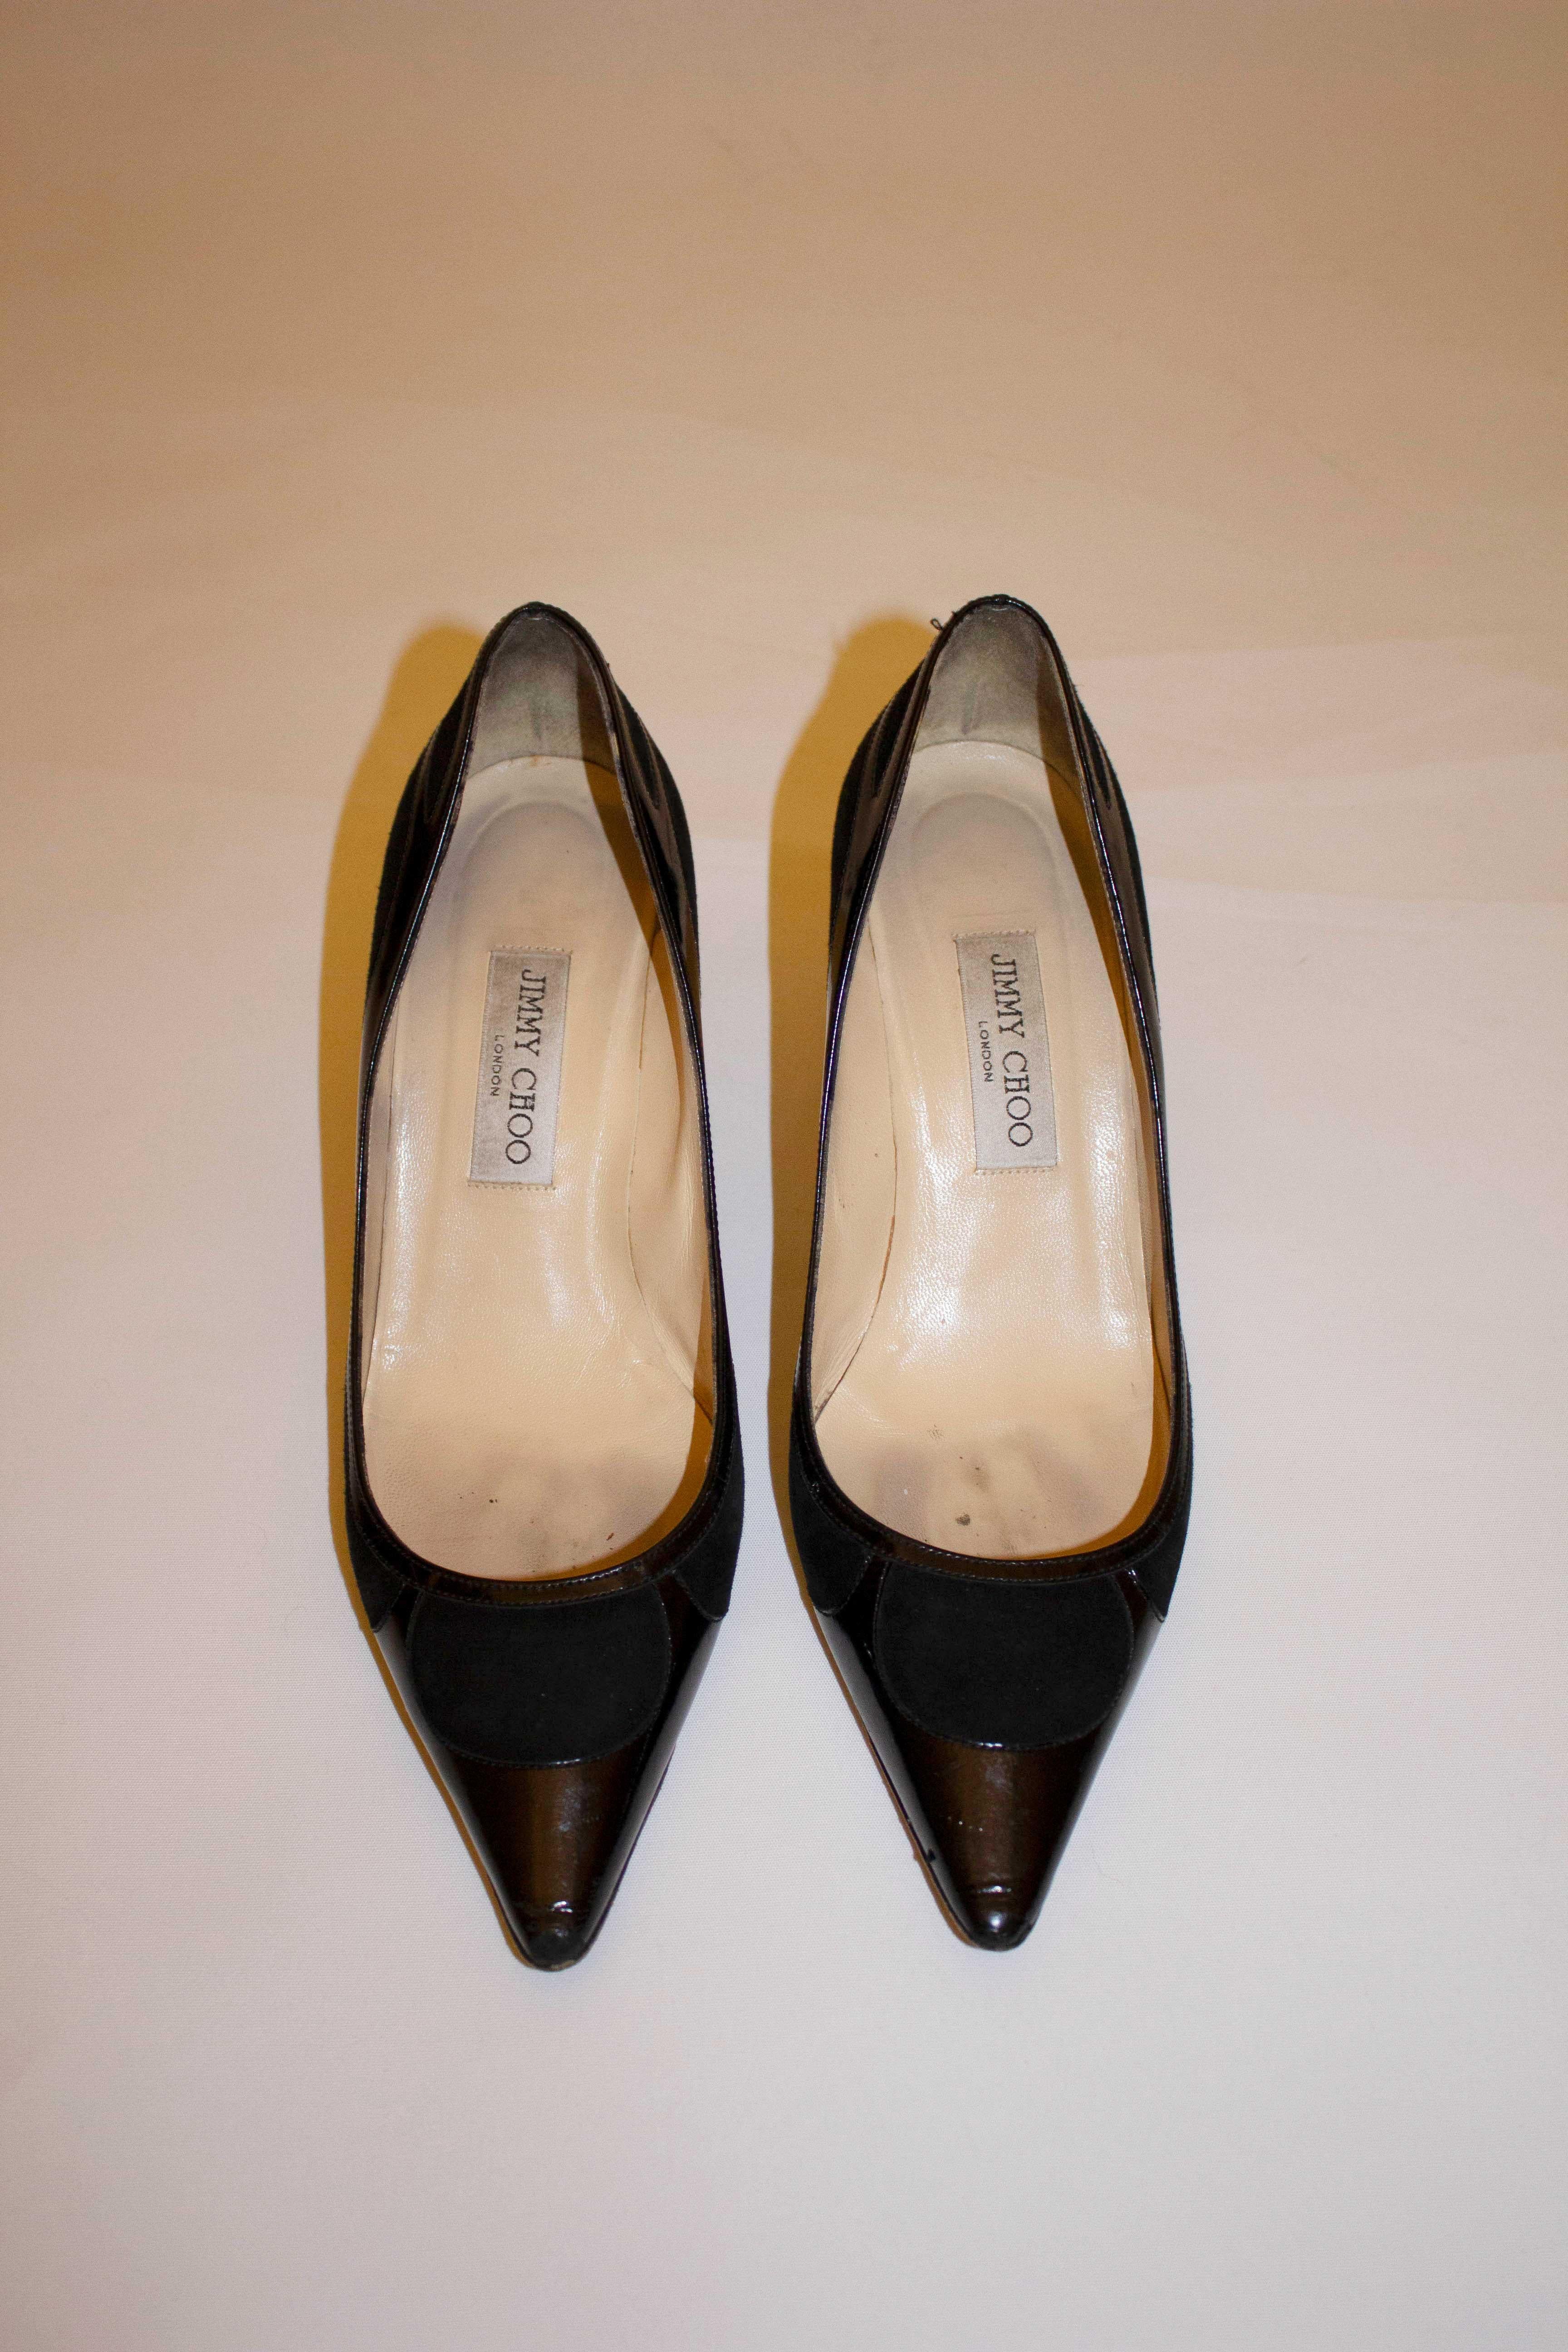 Women's Black Patent and Suede  Jimmy Choo Heels Size 39 1/2 For Sale